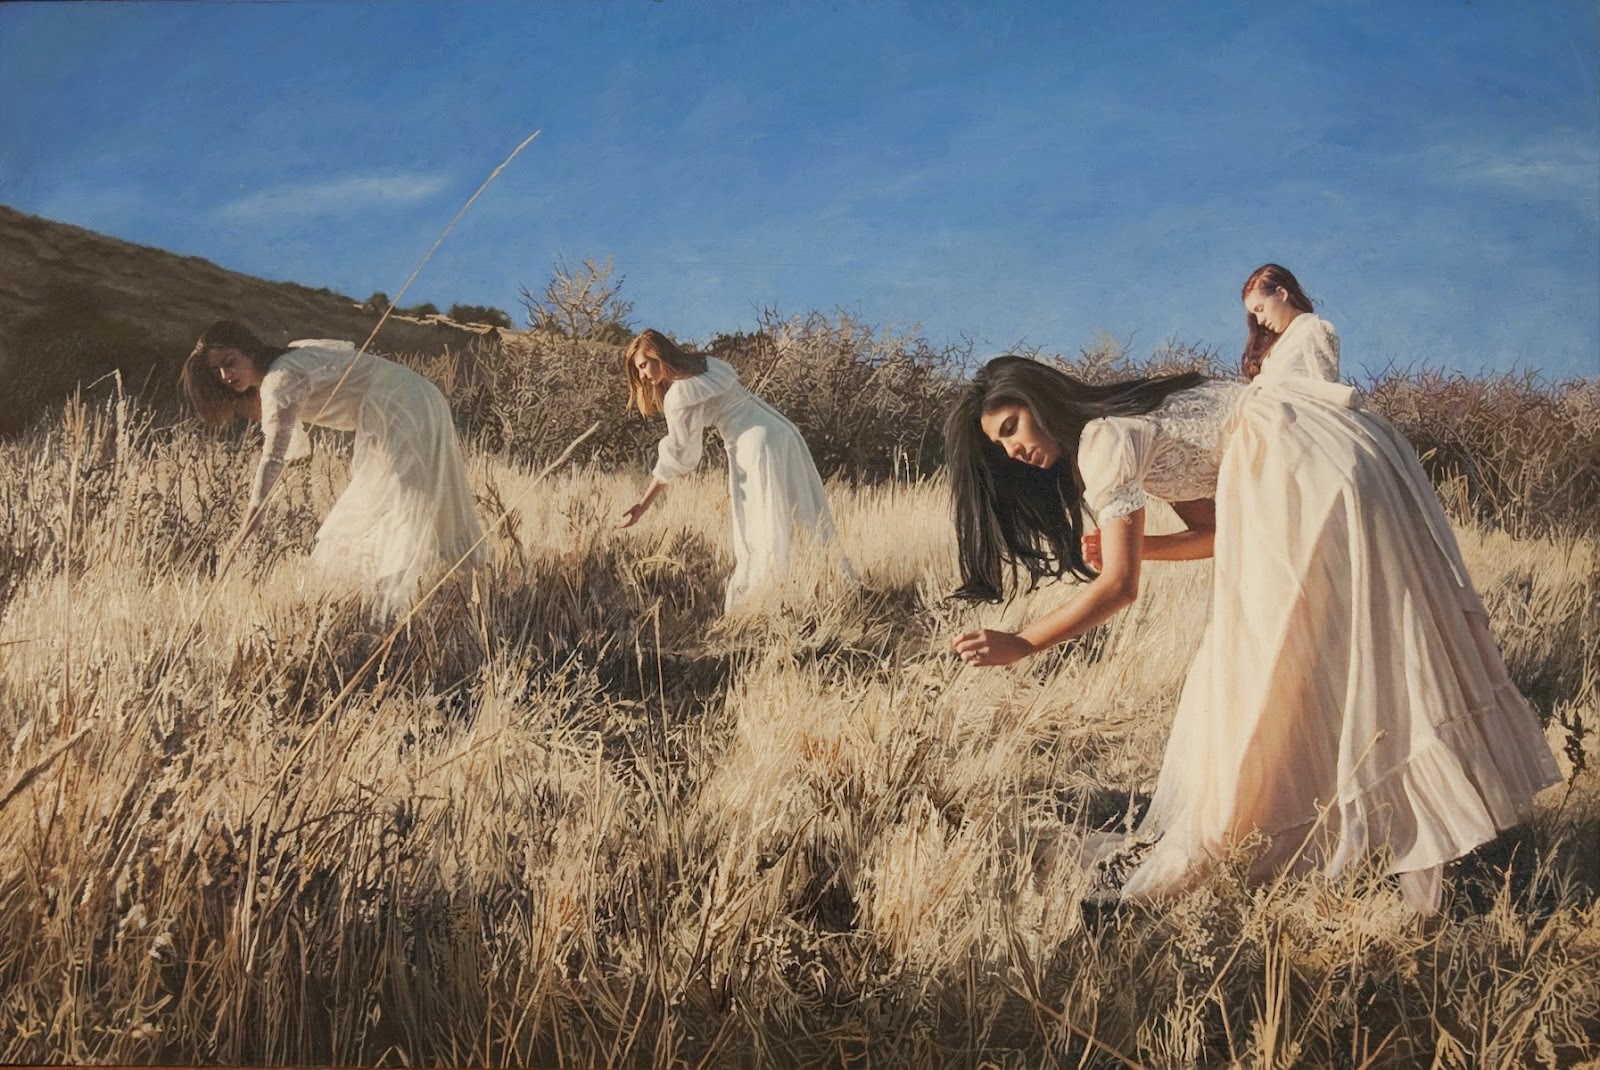 hyper-realism paintings by Yigal Ozeri